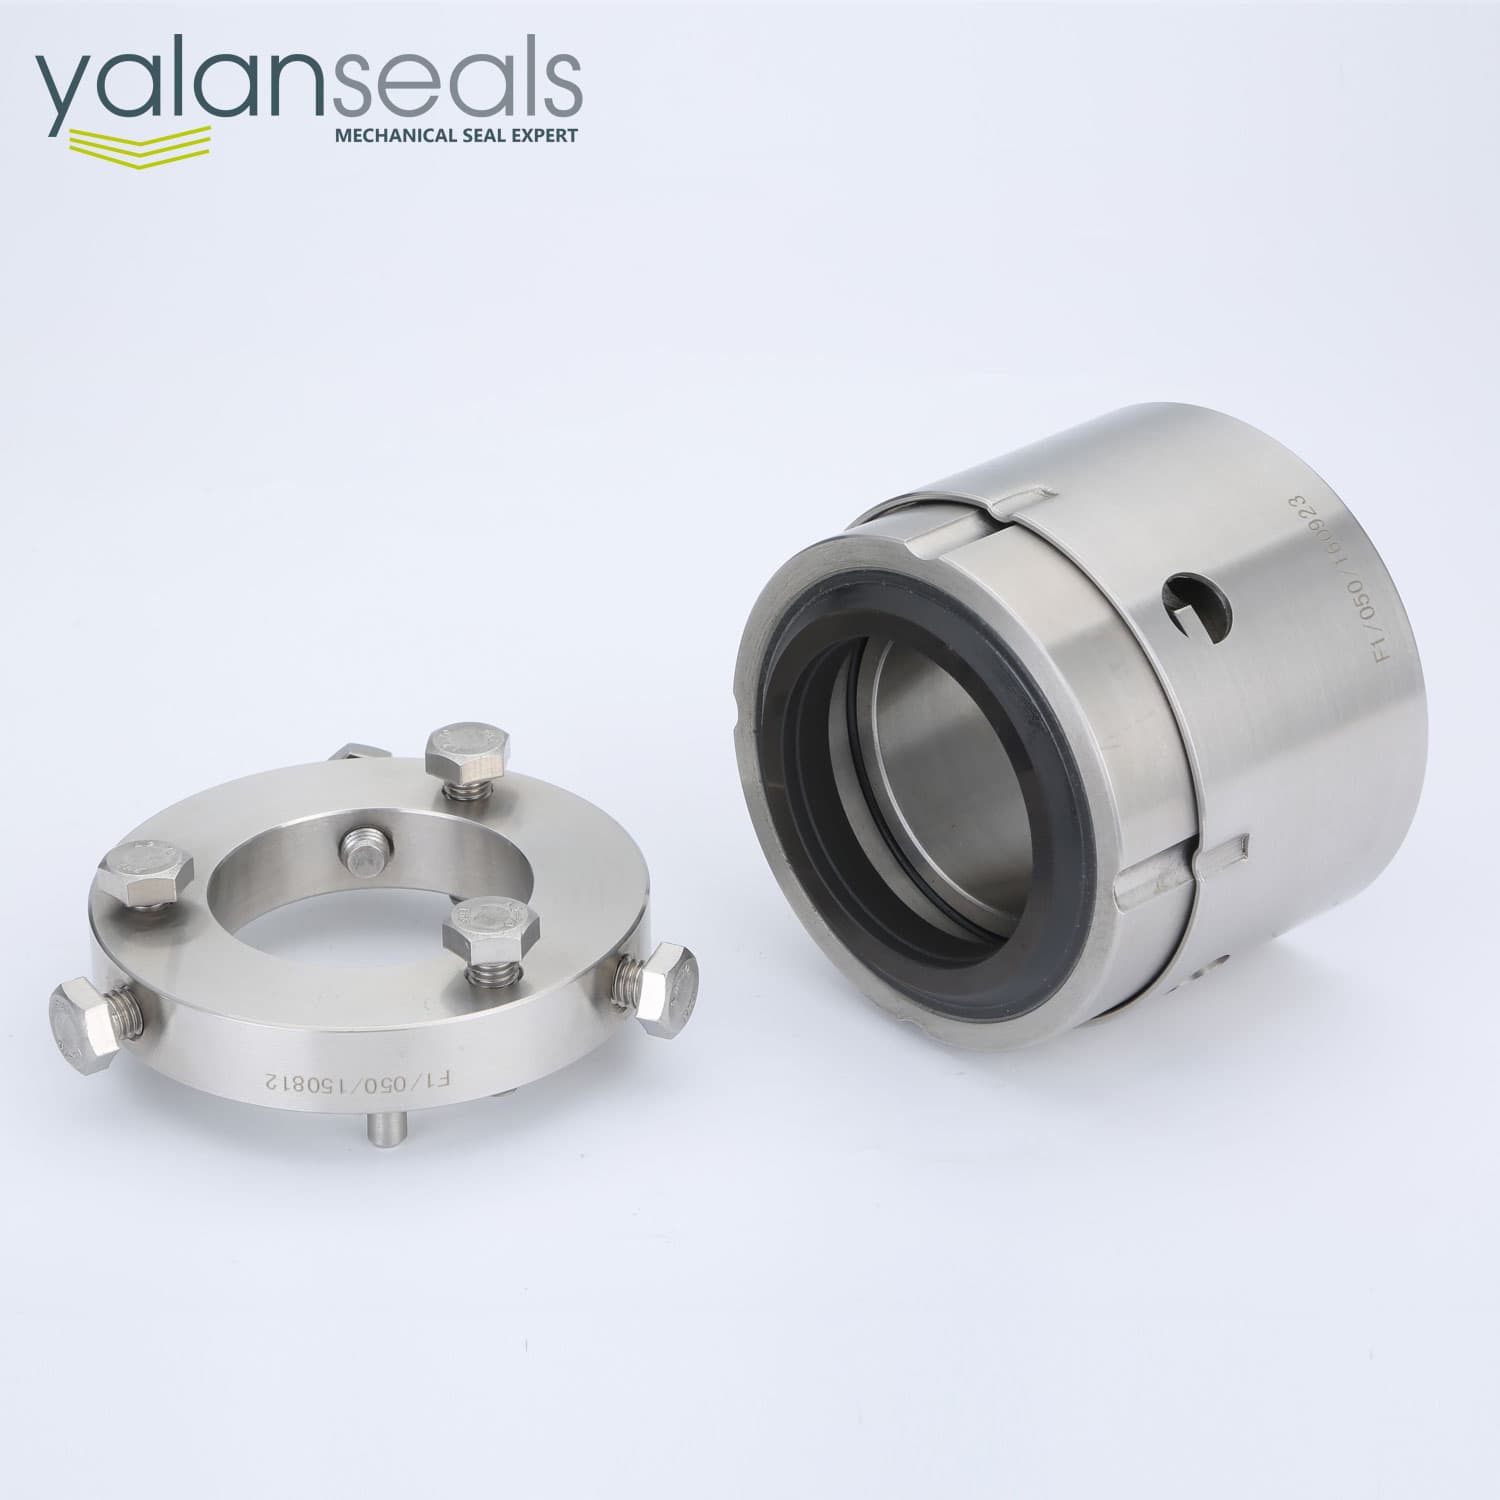 YALAN 104 Mechanical Seal with SiC and Graphite Rings